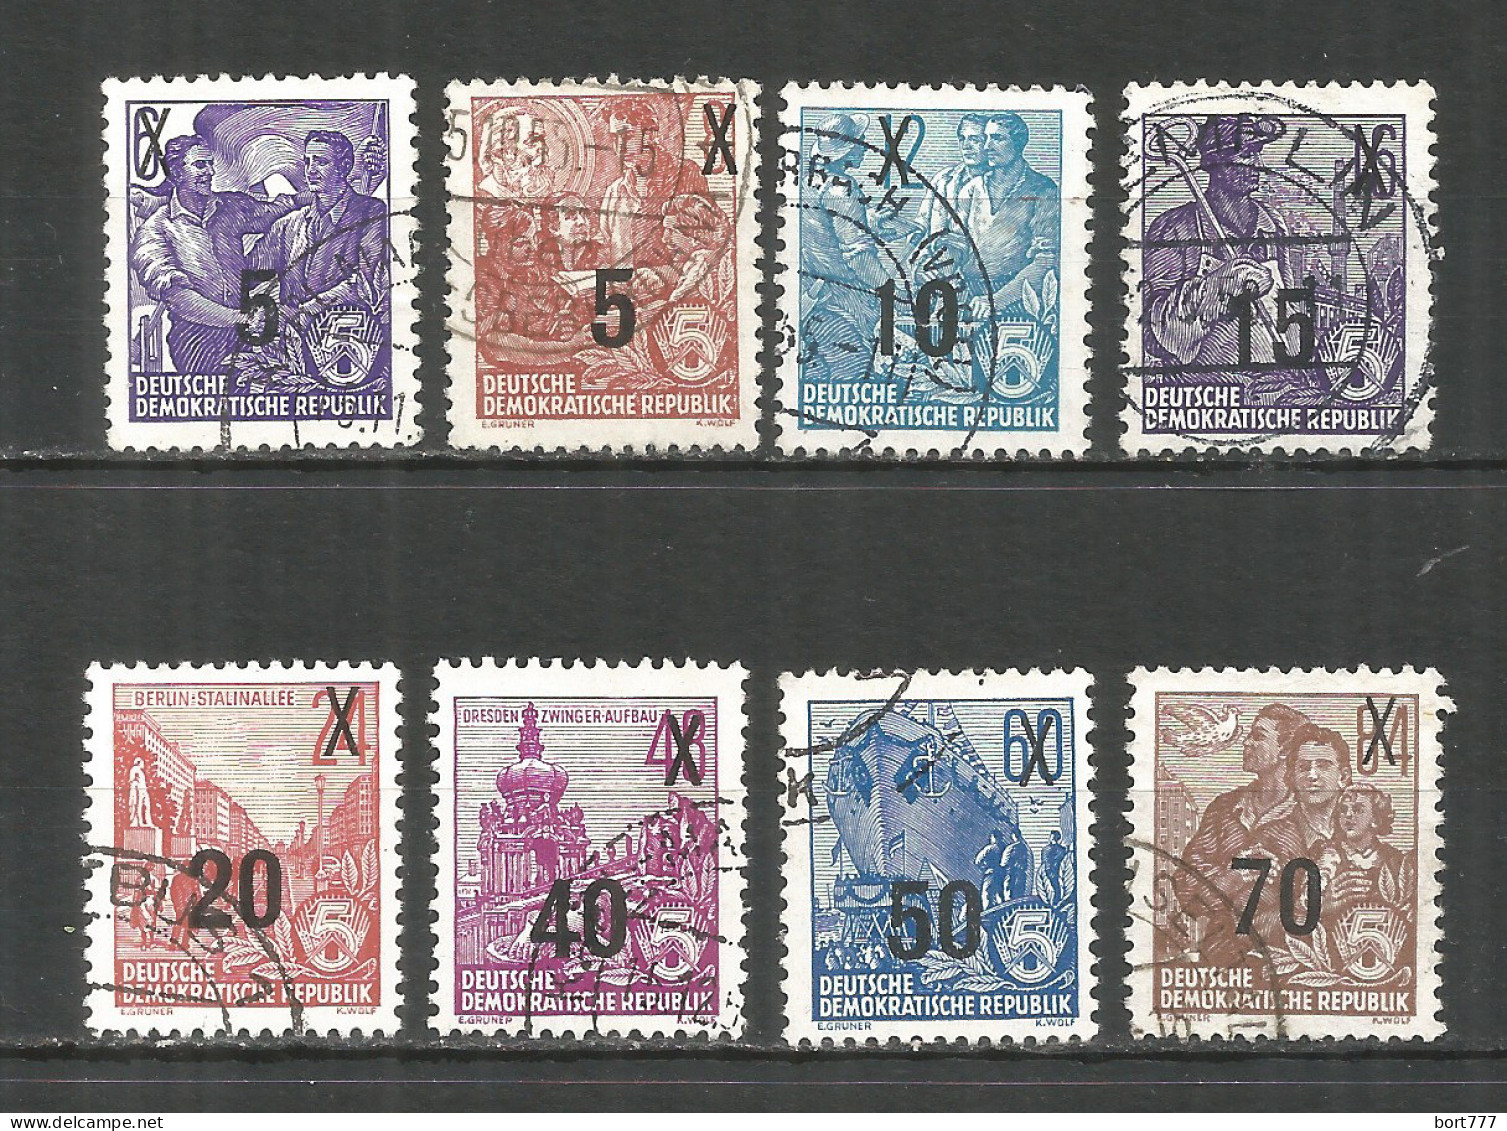 Germany DDR 1954 Year Used Stamps Mi.# 435-442 - Usati